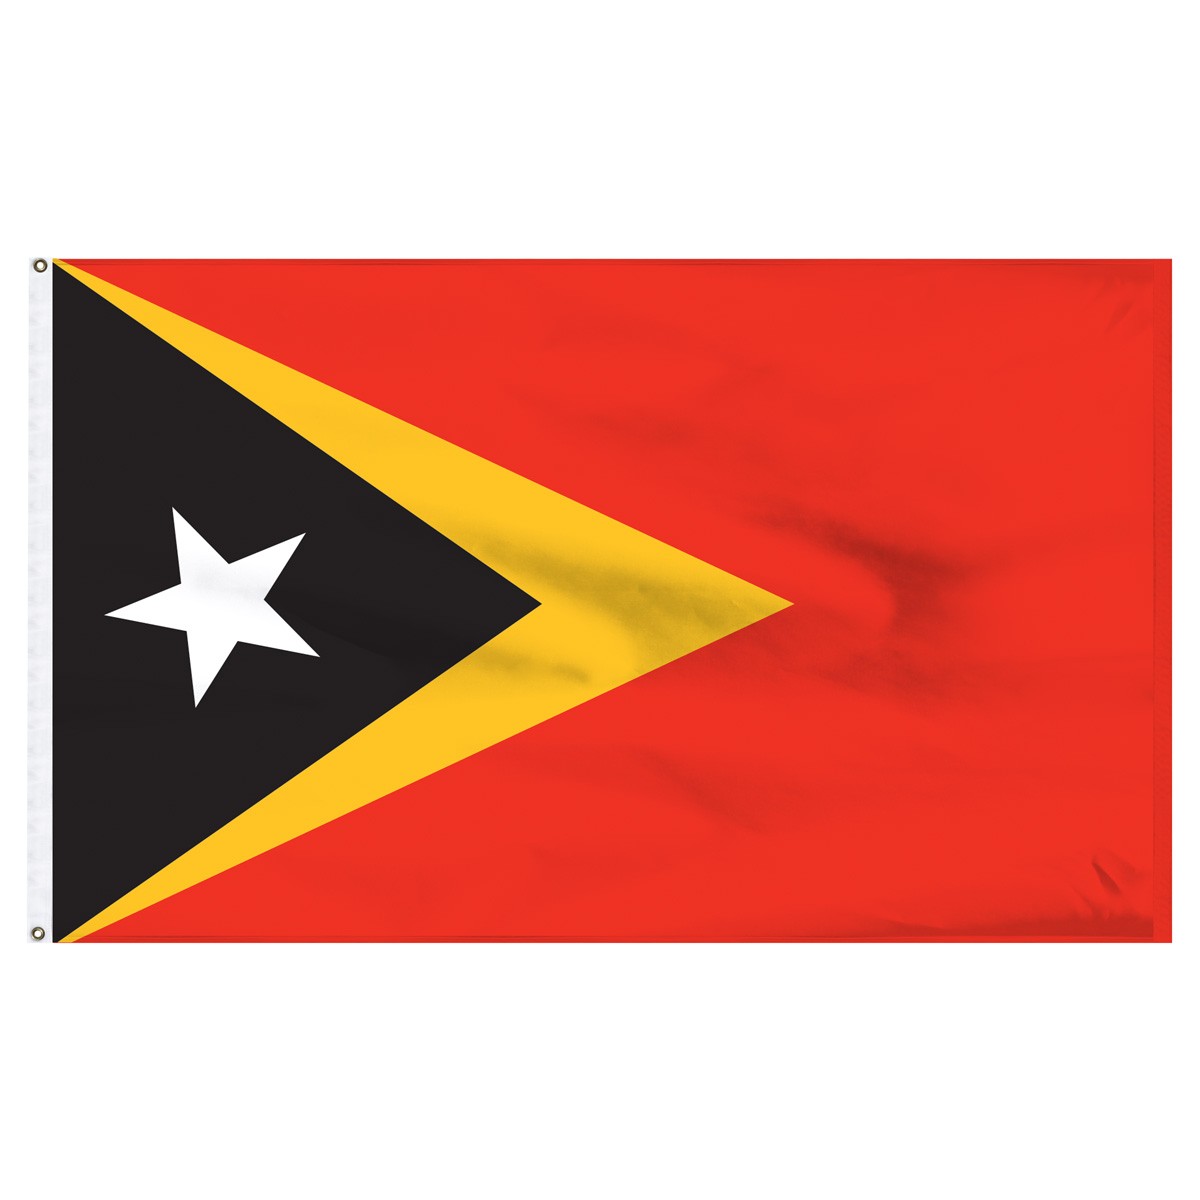 East Timor Posters and Banners